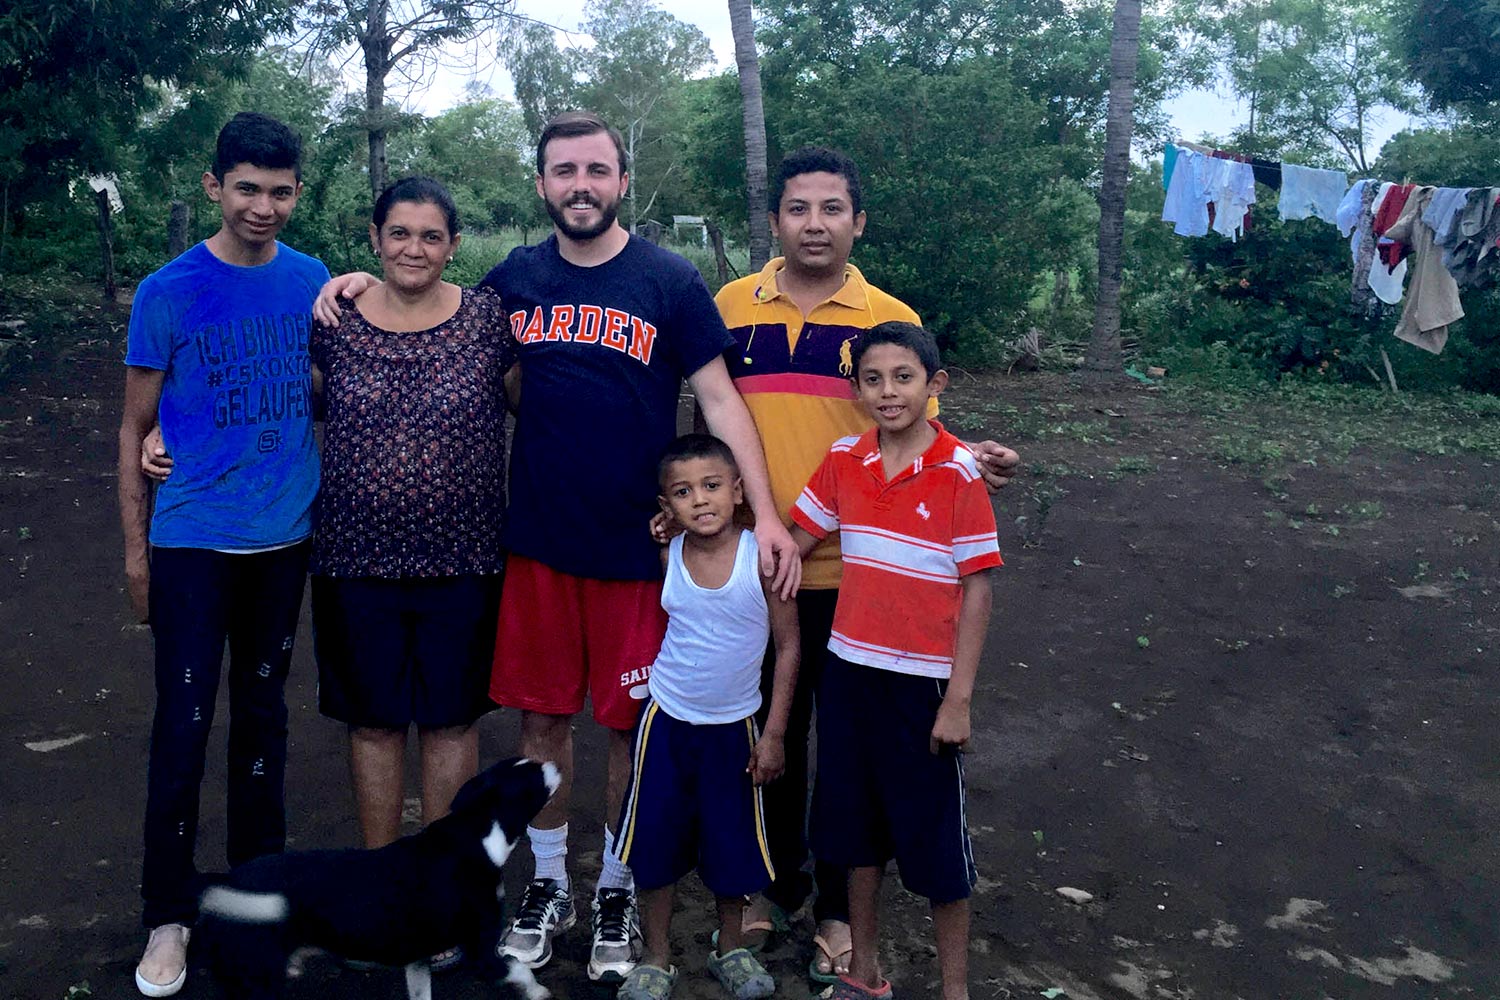 Nick Molloy, a 2013 alumnus, used the time between leaving his corporate finance job and beginning his graduate studies at the Darden School of Business this fall to stay with a host family in Nicaragua.